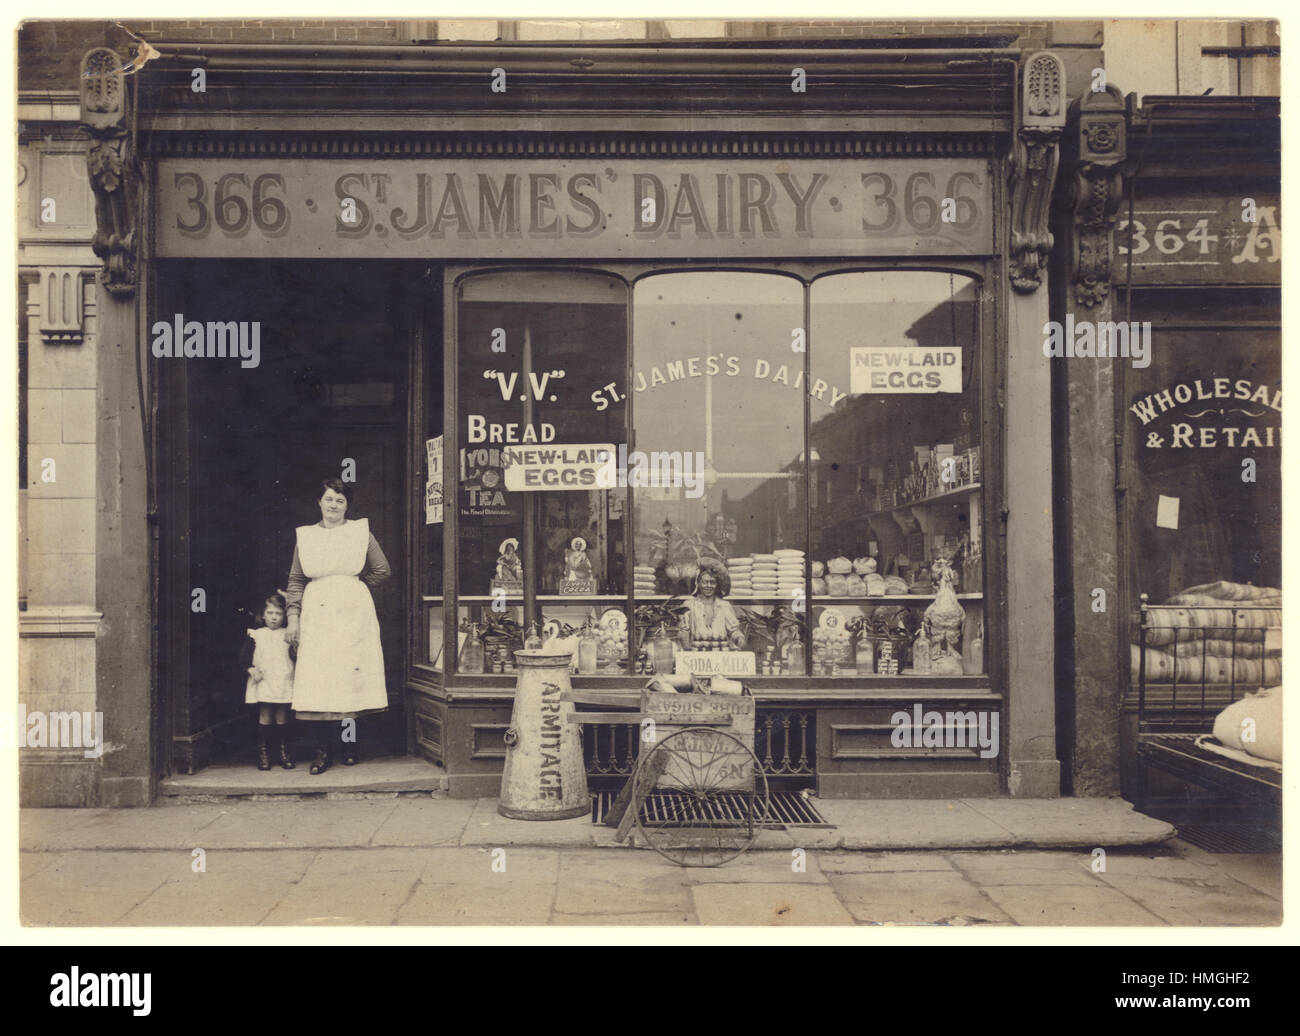 Original early 1900's WW1 era postcard of St. James' Dairy shop / grocery store with female proprietor / owner or staff / assistant and her child, wonderful selection of brands such as Nevill's bread, Tate cube sugar, Armitage, Lyons cocoa and tea. New laid eggs sold loose. London, U.K. circa 1915 Stock Photo